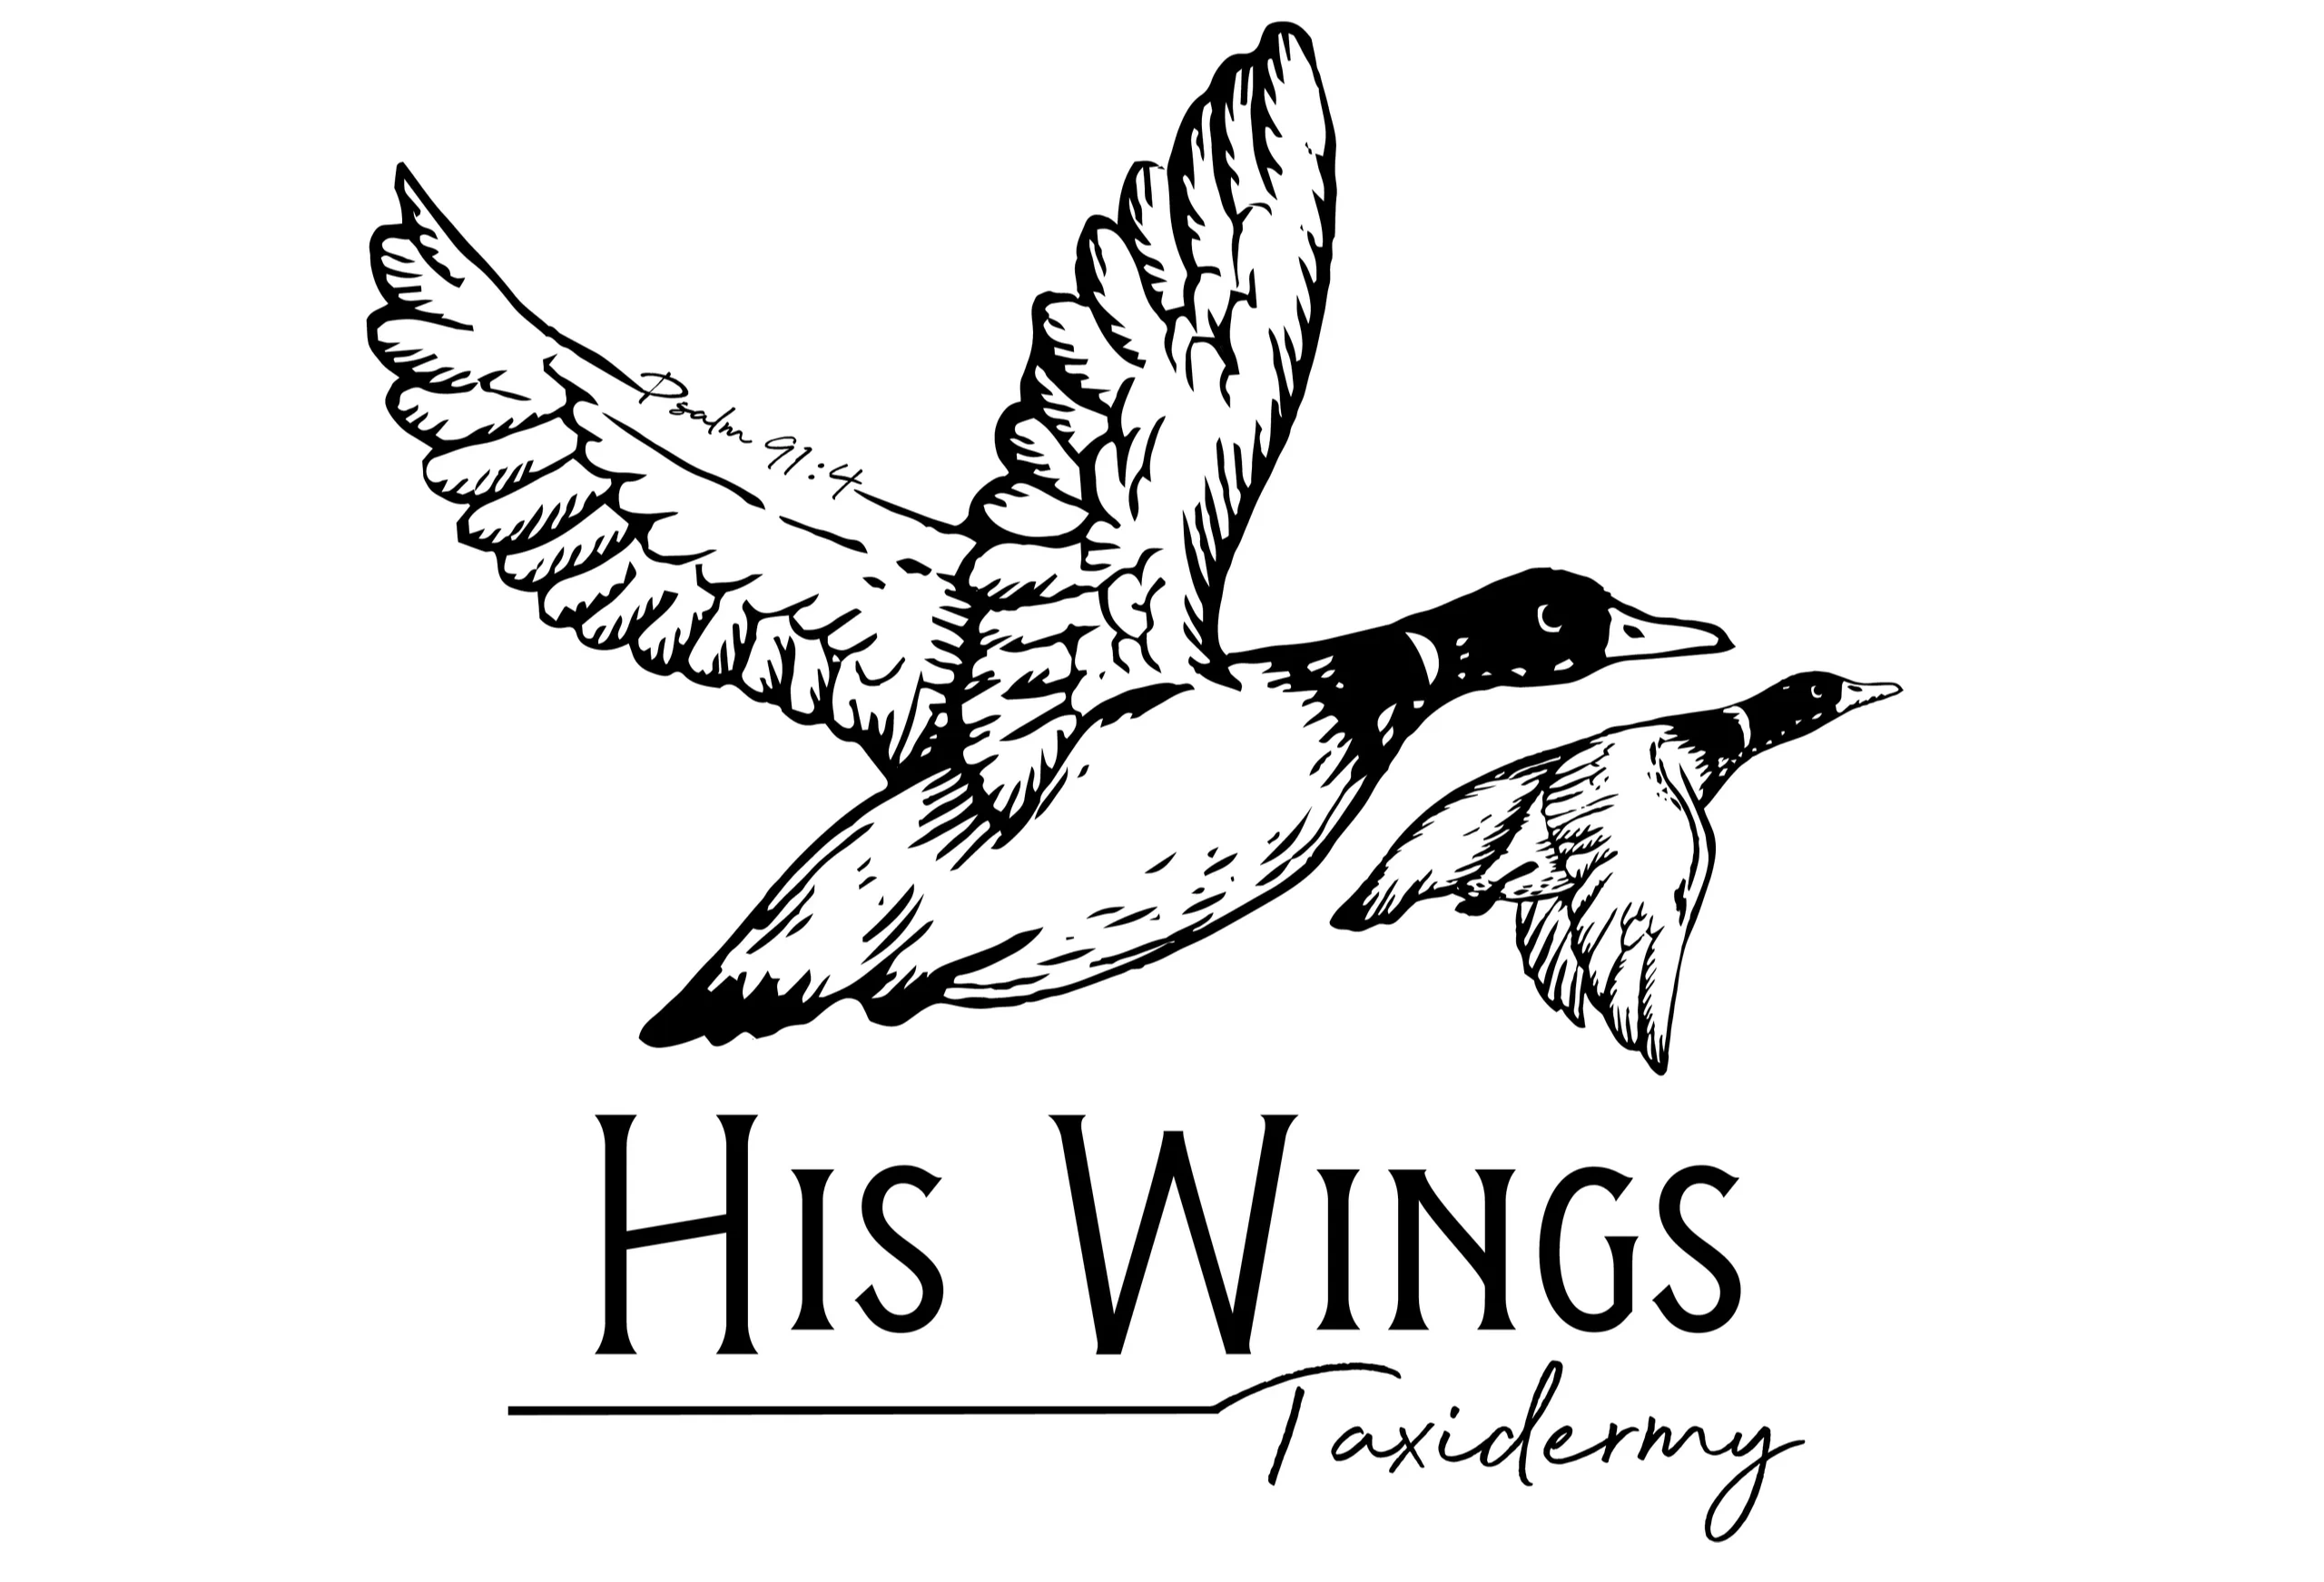 His Wings Taxidermy Logo